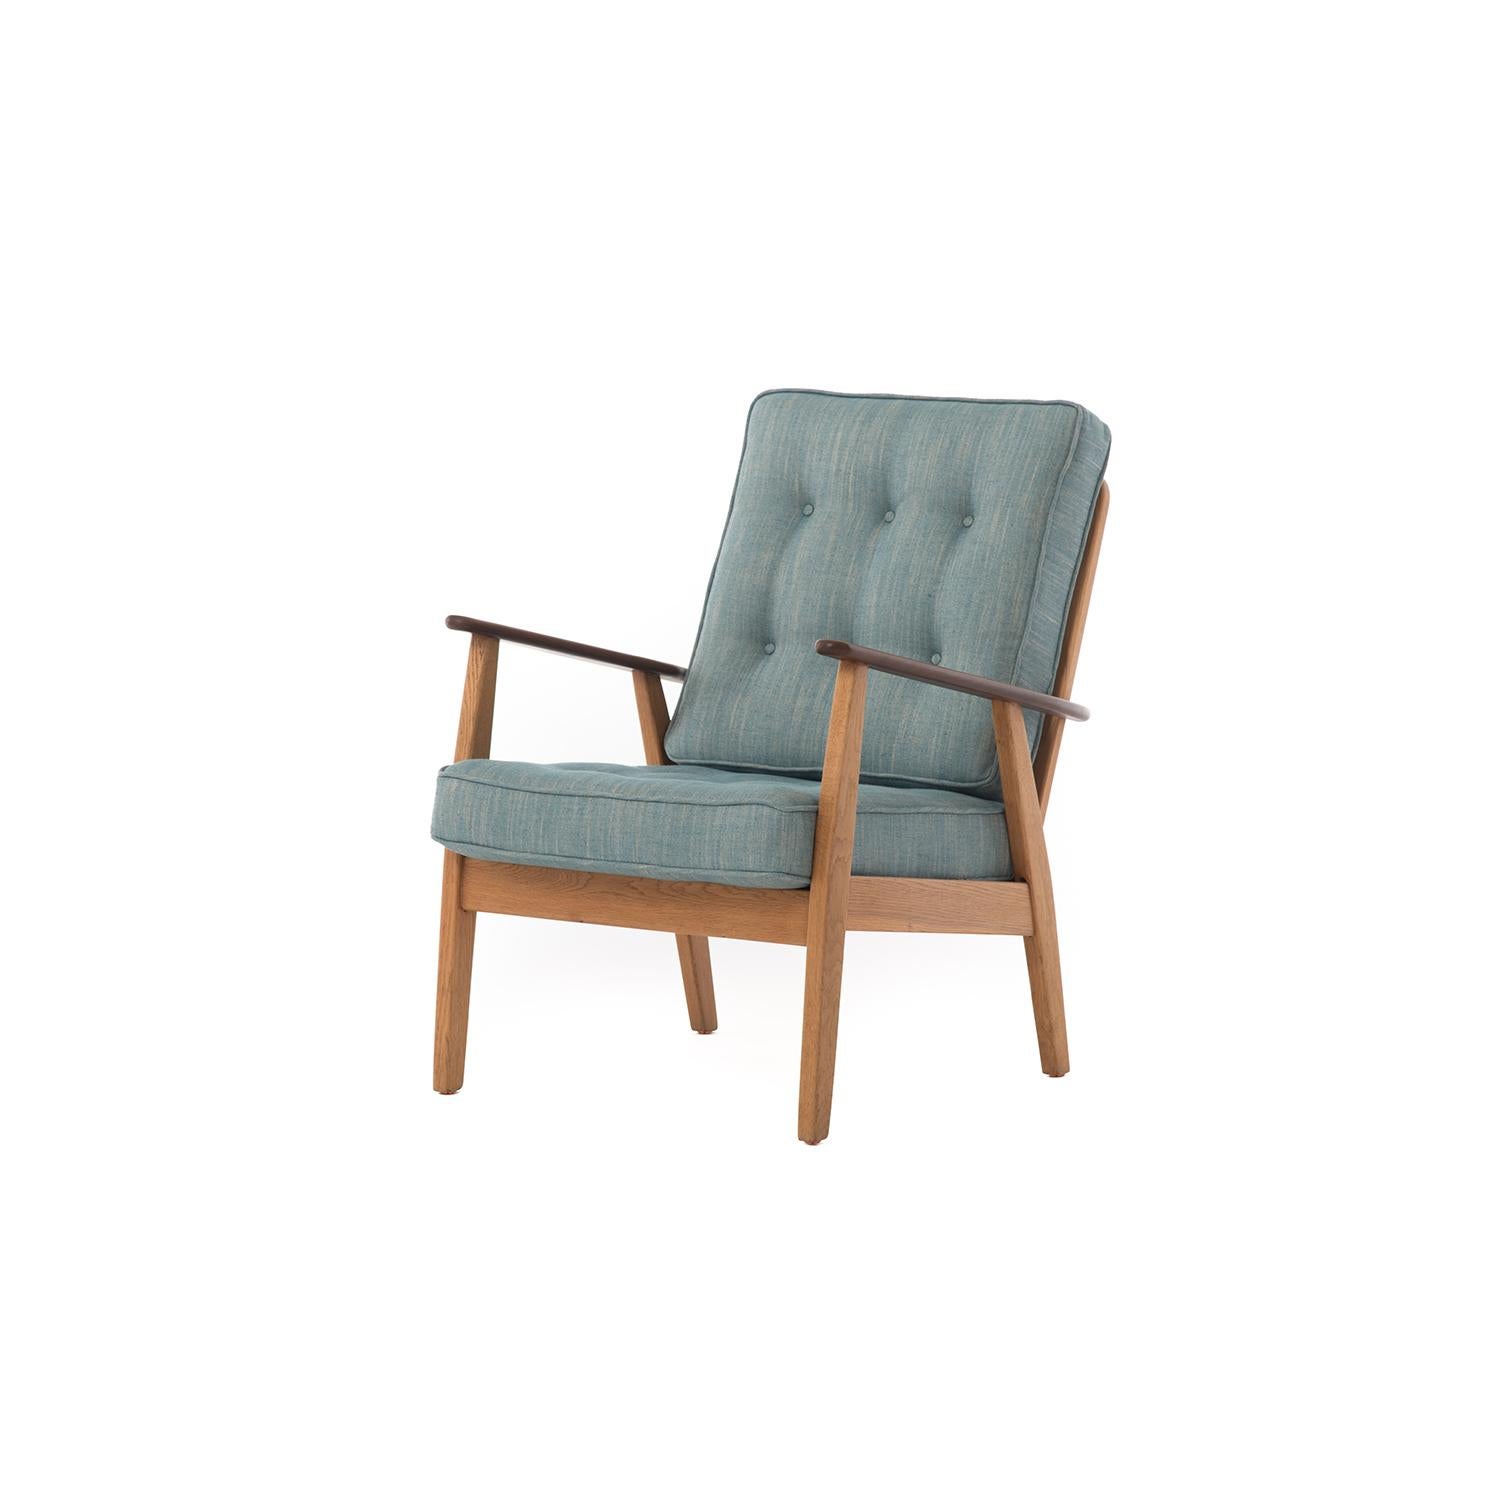 This 1950s midcentury lounge chair boasts a solid oiled oak frame and sculptural teak arms, material choices that are of the era. The newly upholstered cushions in cadet blue linen provide a comfortable spot for relaxing after a day of adventure.